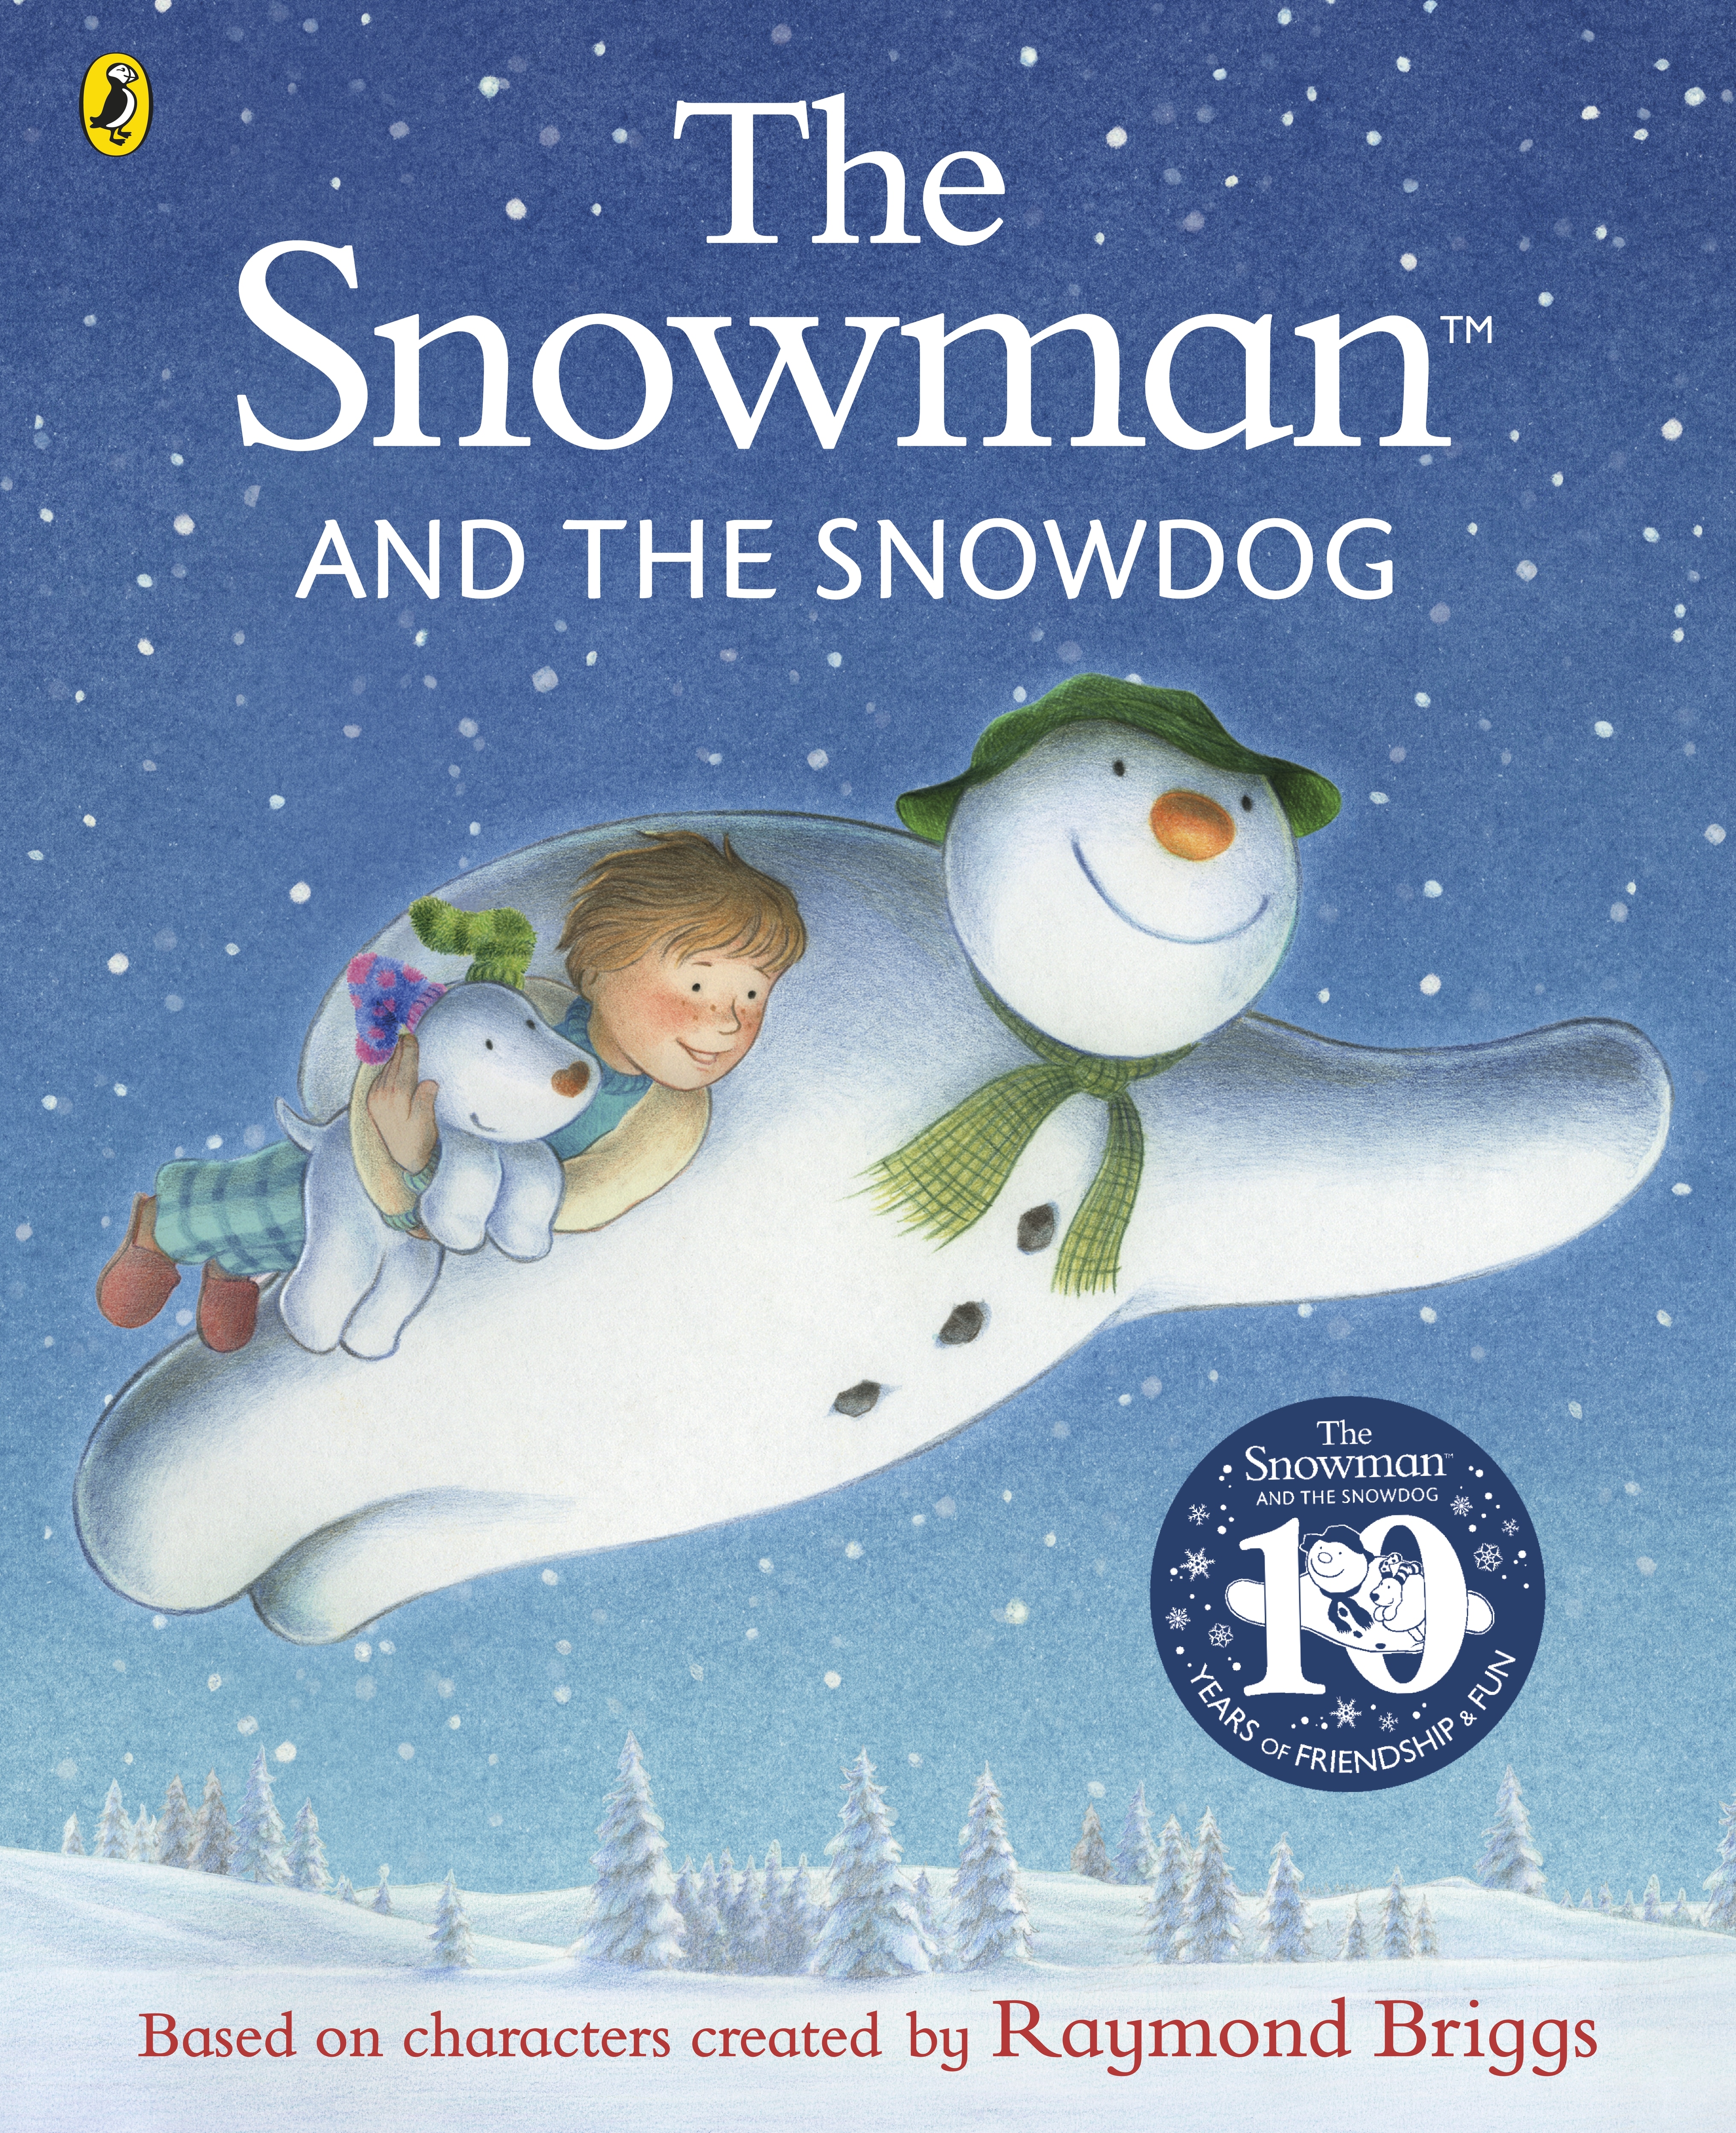 Book “The Snowman and the Snowdog” by Raymond Briggs — September 29, 2022